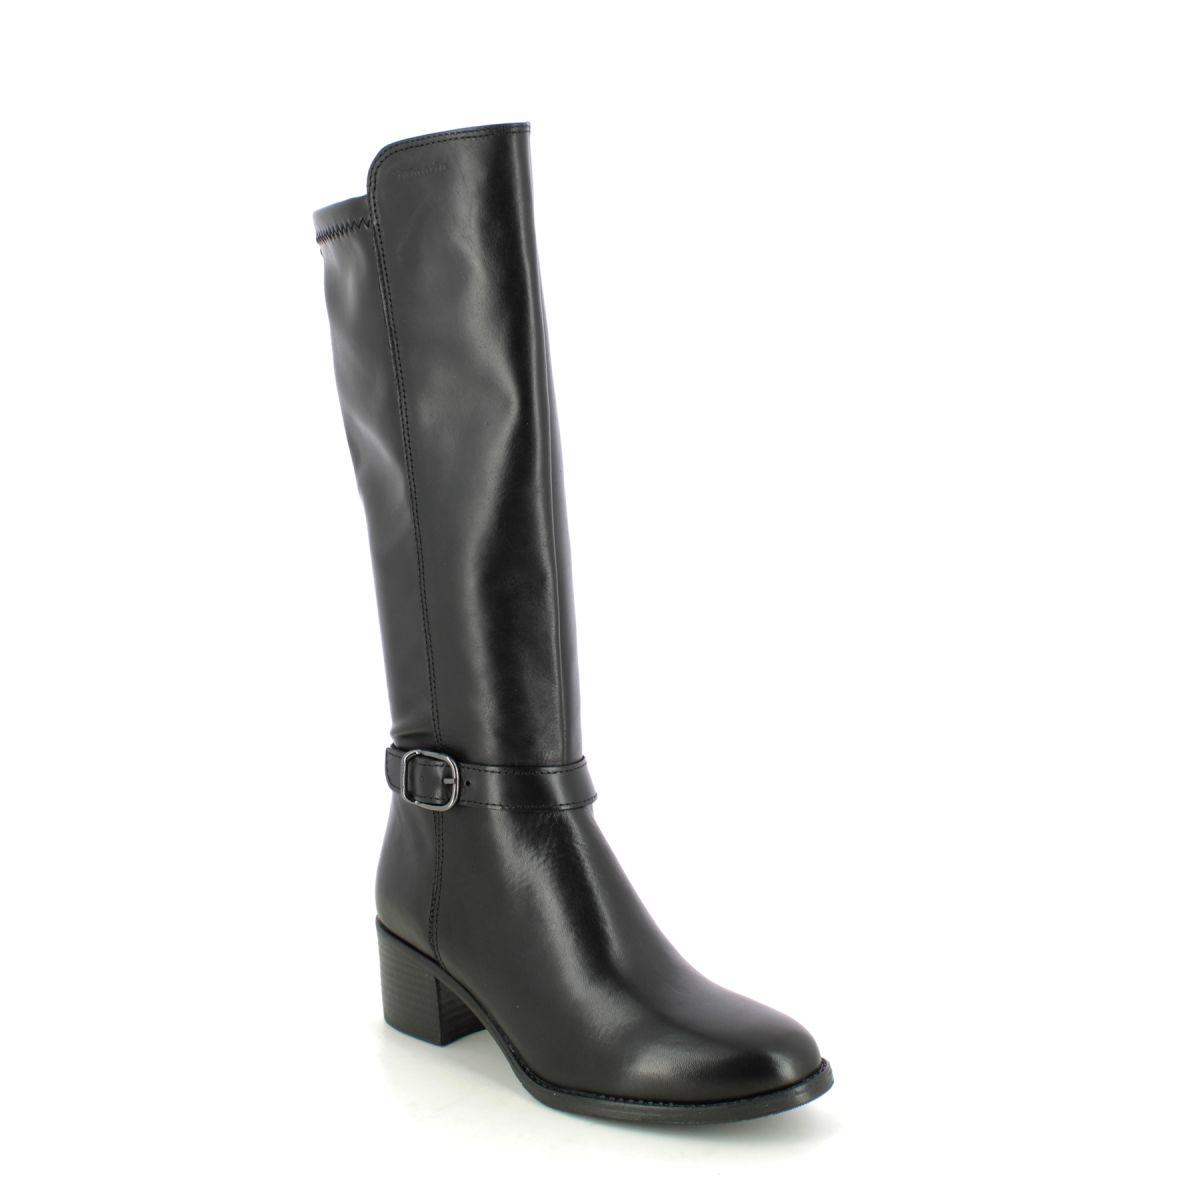 Tamaris Paulettalong Black Leather Womens Knee-High Boots 25530-27-001 In Size 39 In Plain Black Leather